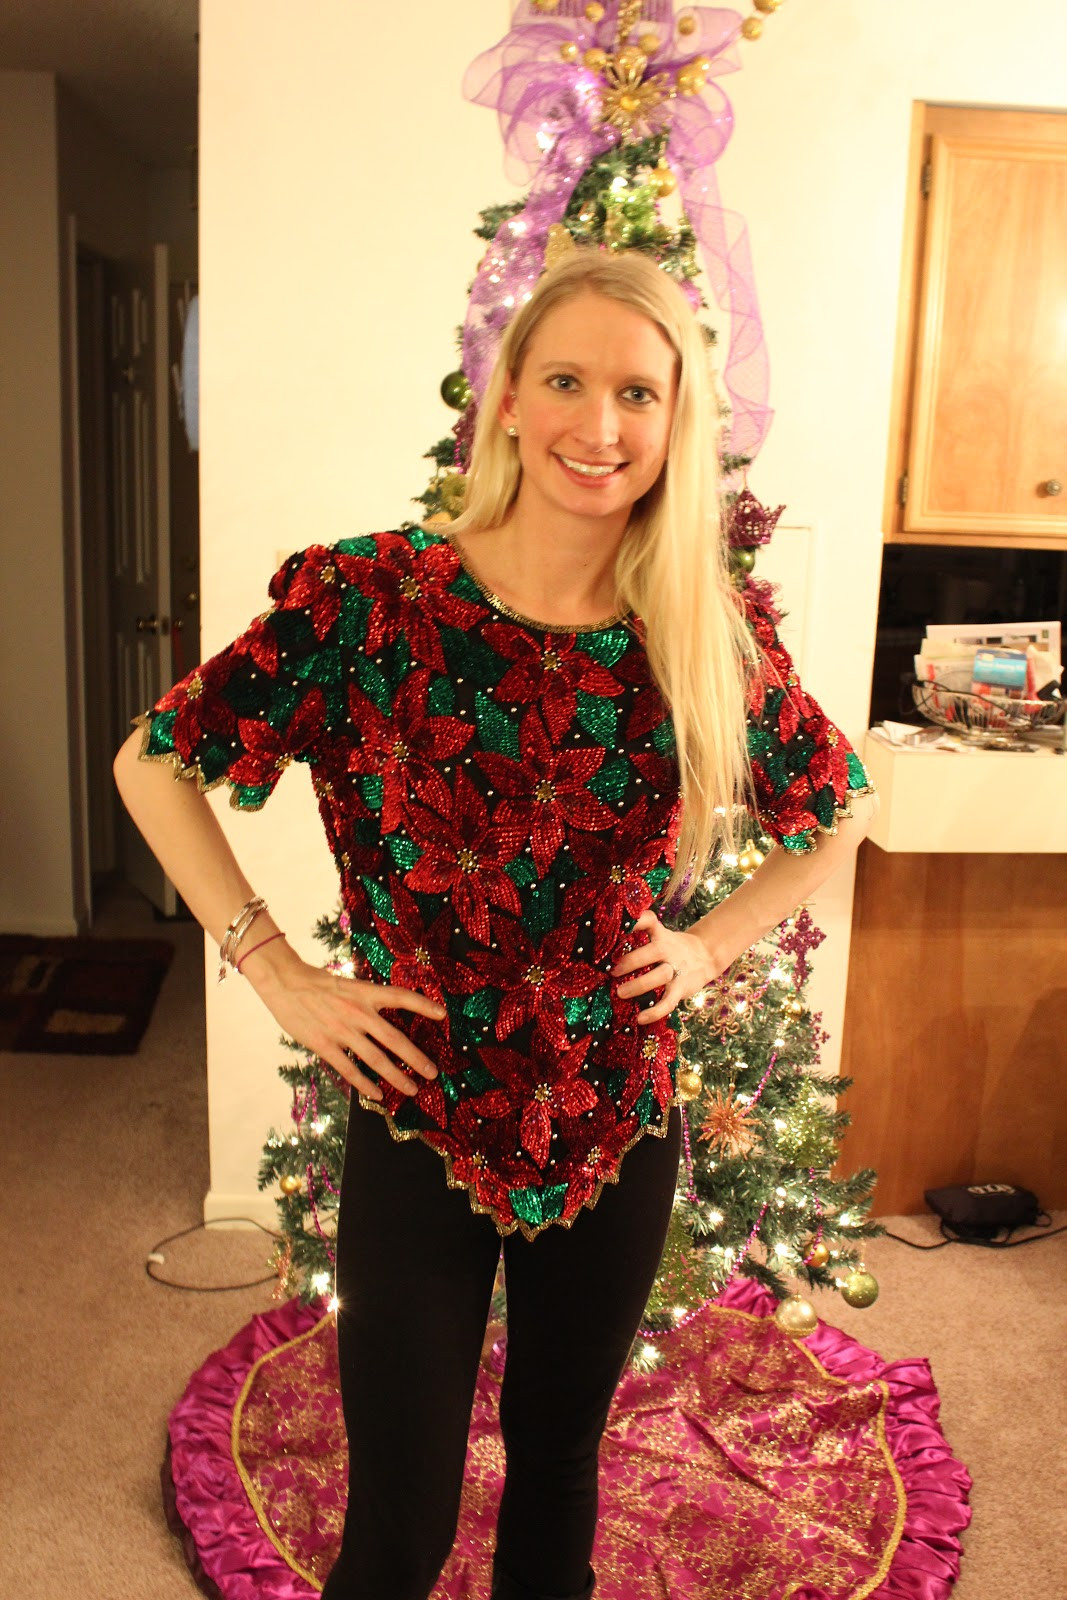 Best DIY Ugly Christmas Sweater
 Keepin it Thrifty What I Wore My Ugly Christmas Sweater